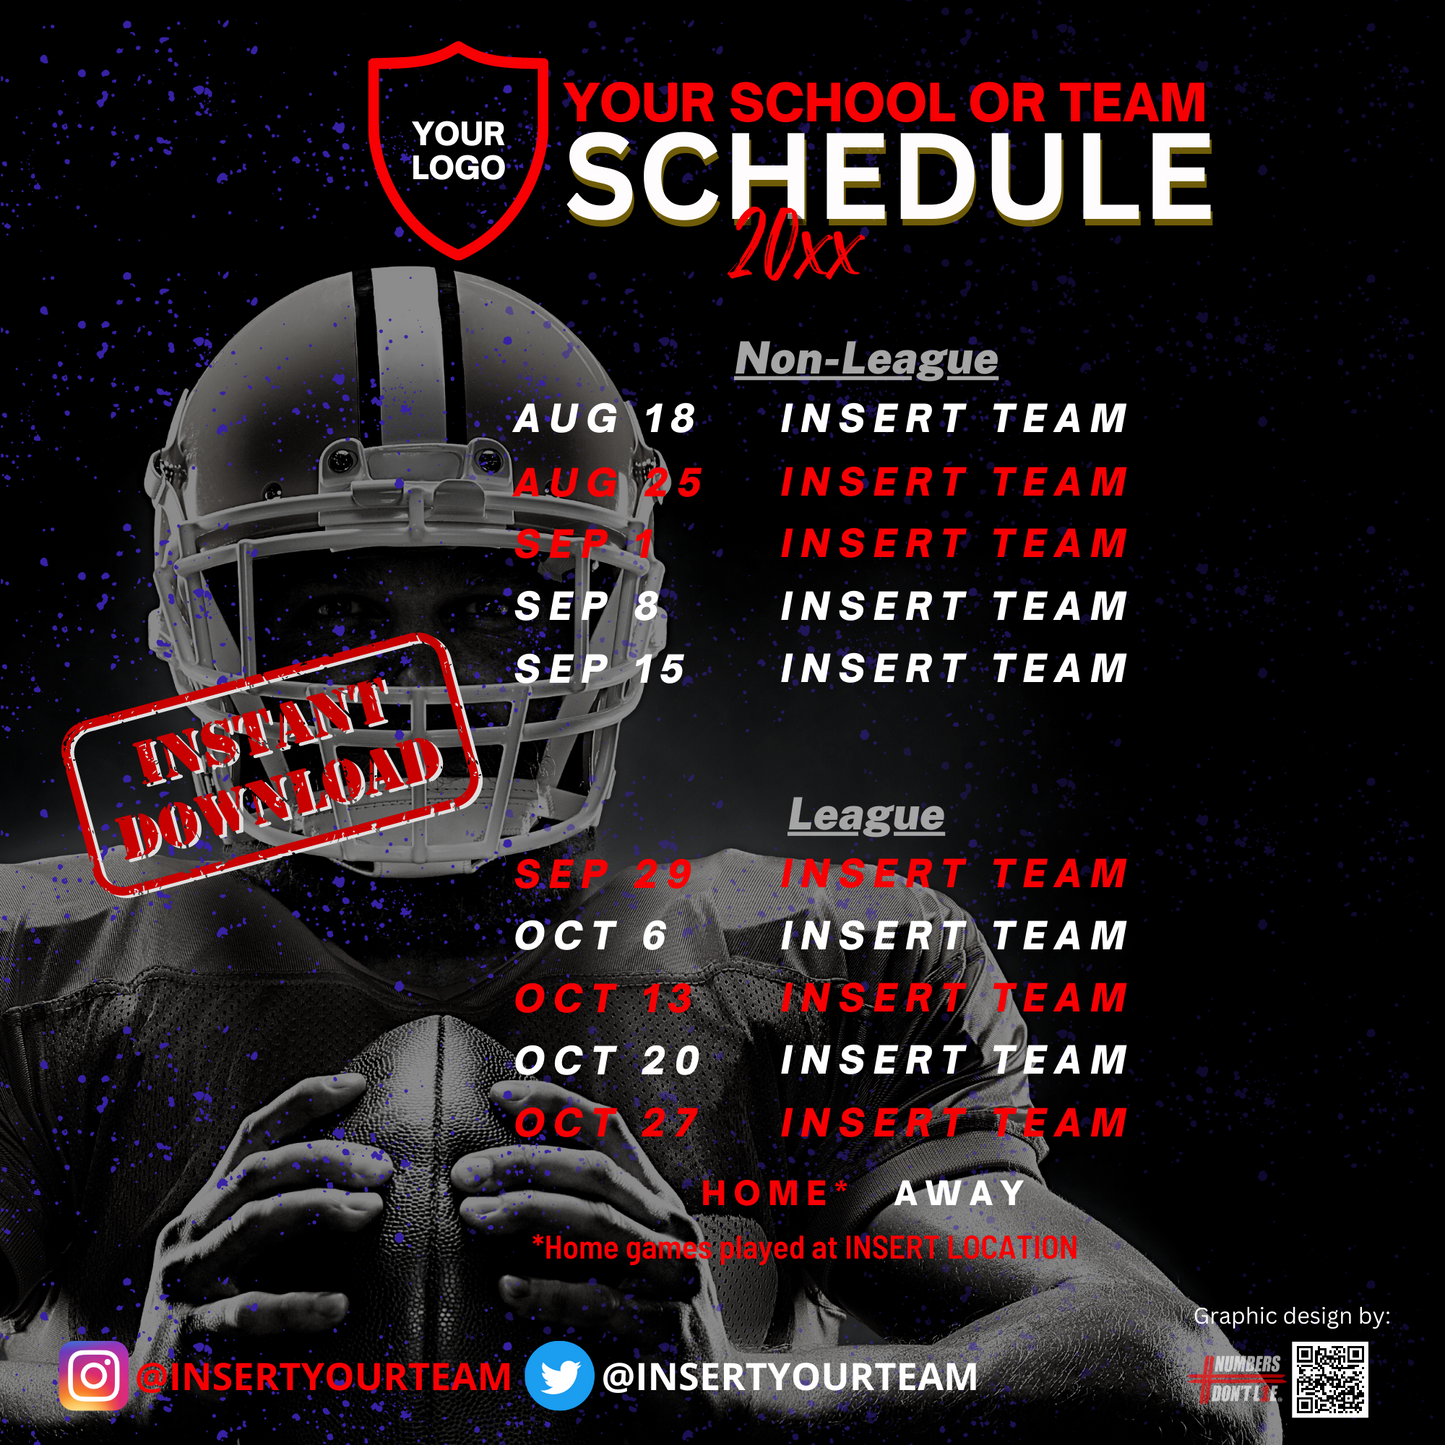 "Editable DIY Football & Multi-Sport Schedule Canva Template for Social Media Engagement